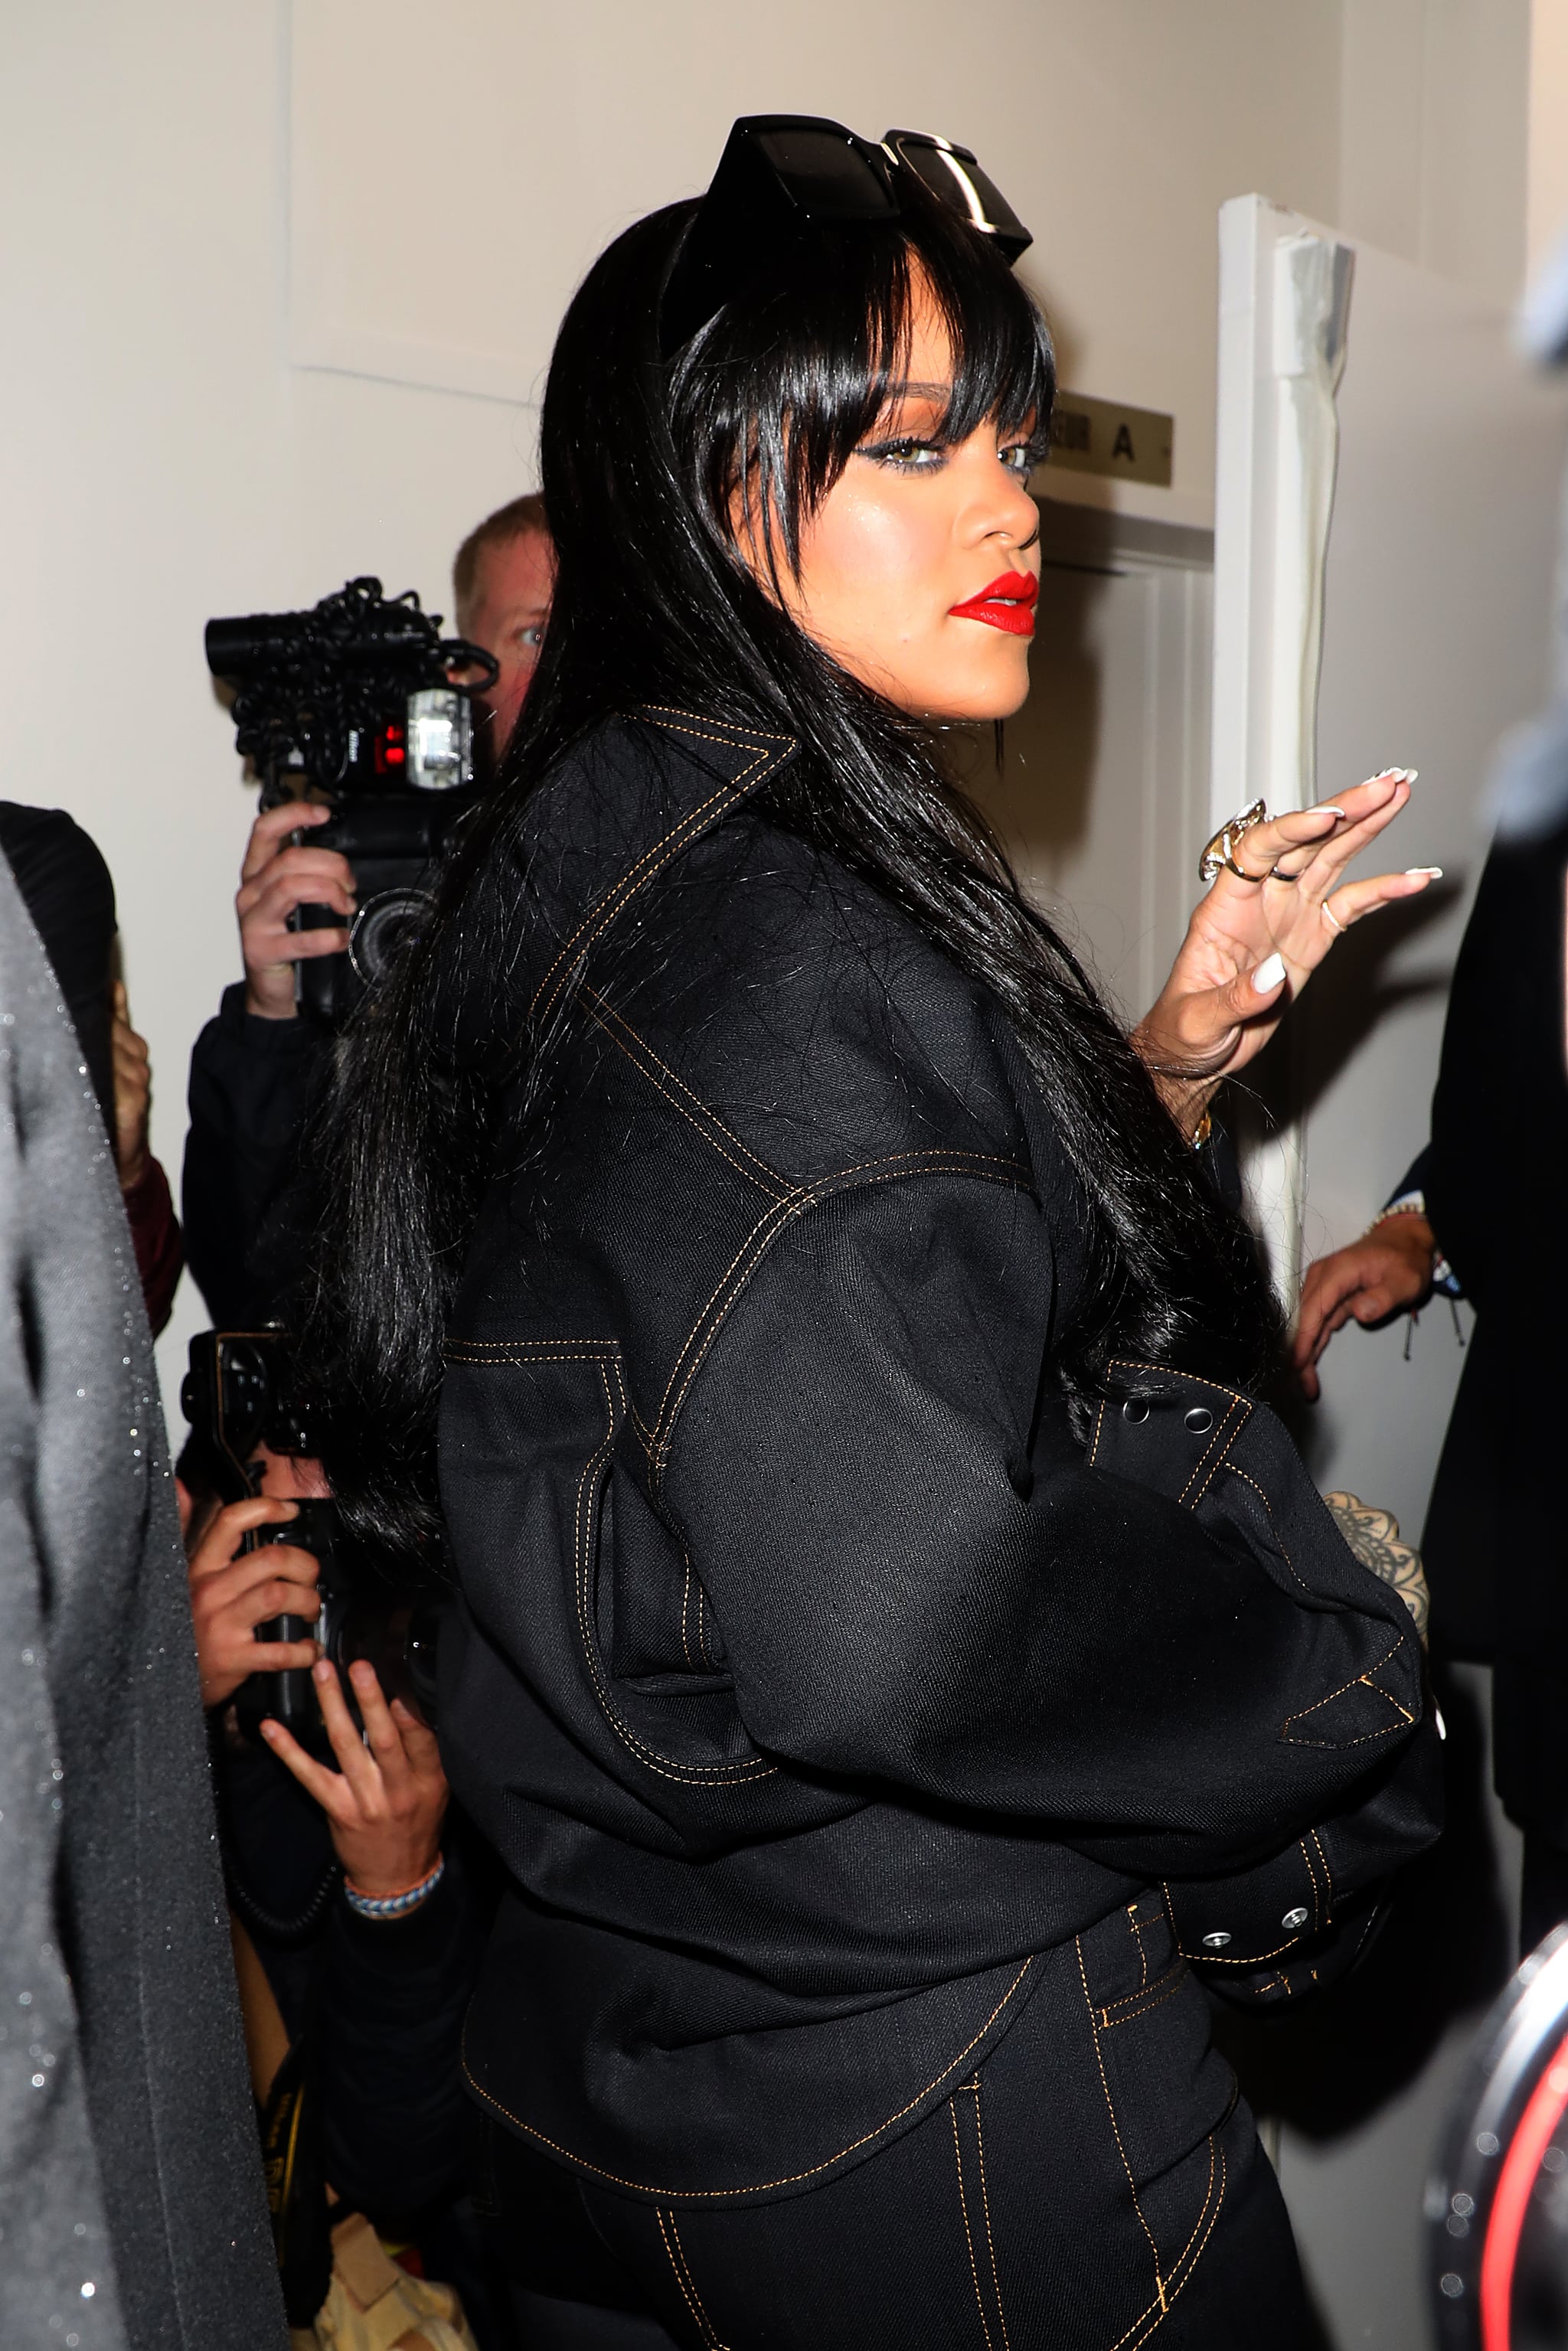 Rihanna & Co. have slayed these black hairstyles with bangs